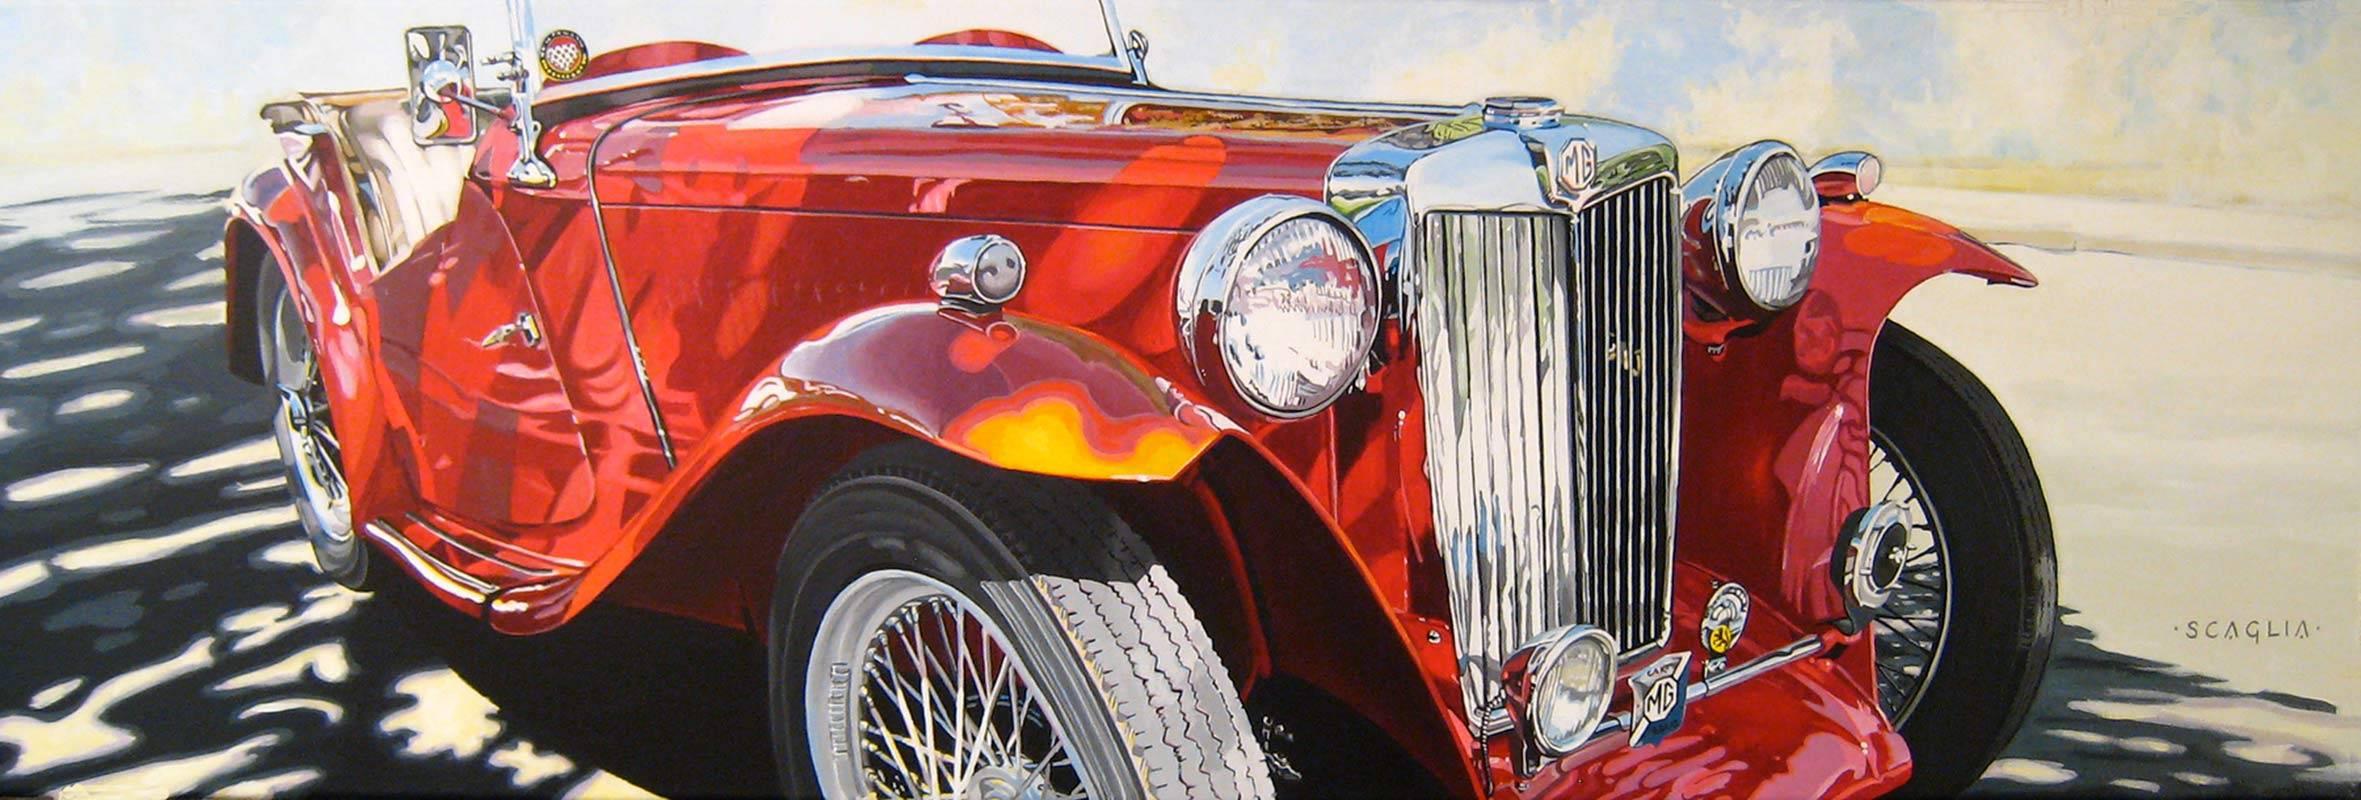 Dappled MG - Painting by Ken Scaglia